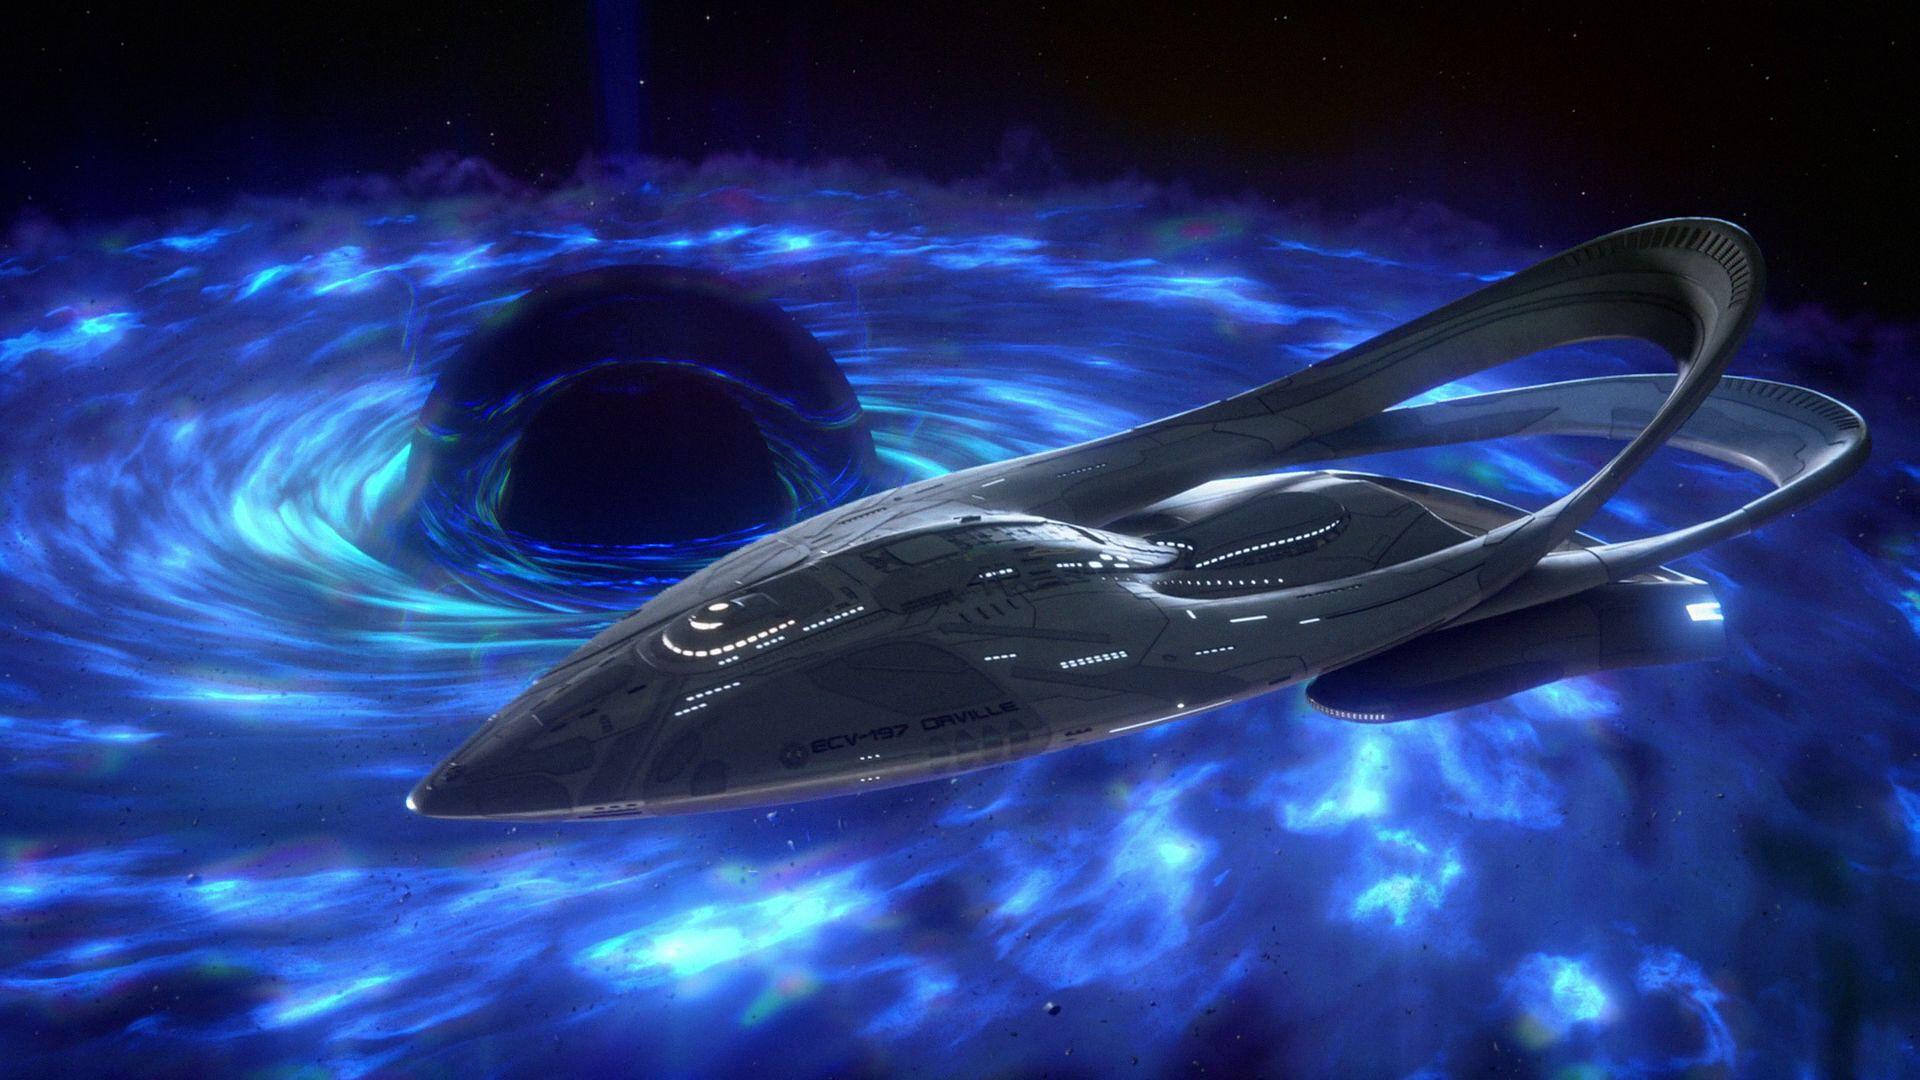 Do you guys have better wallpaper of The Orville?